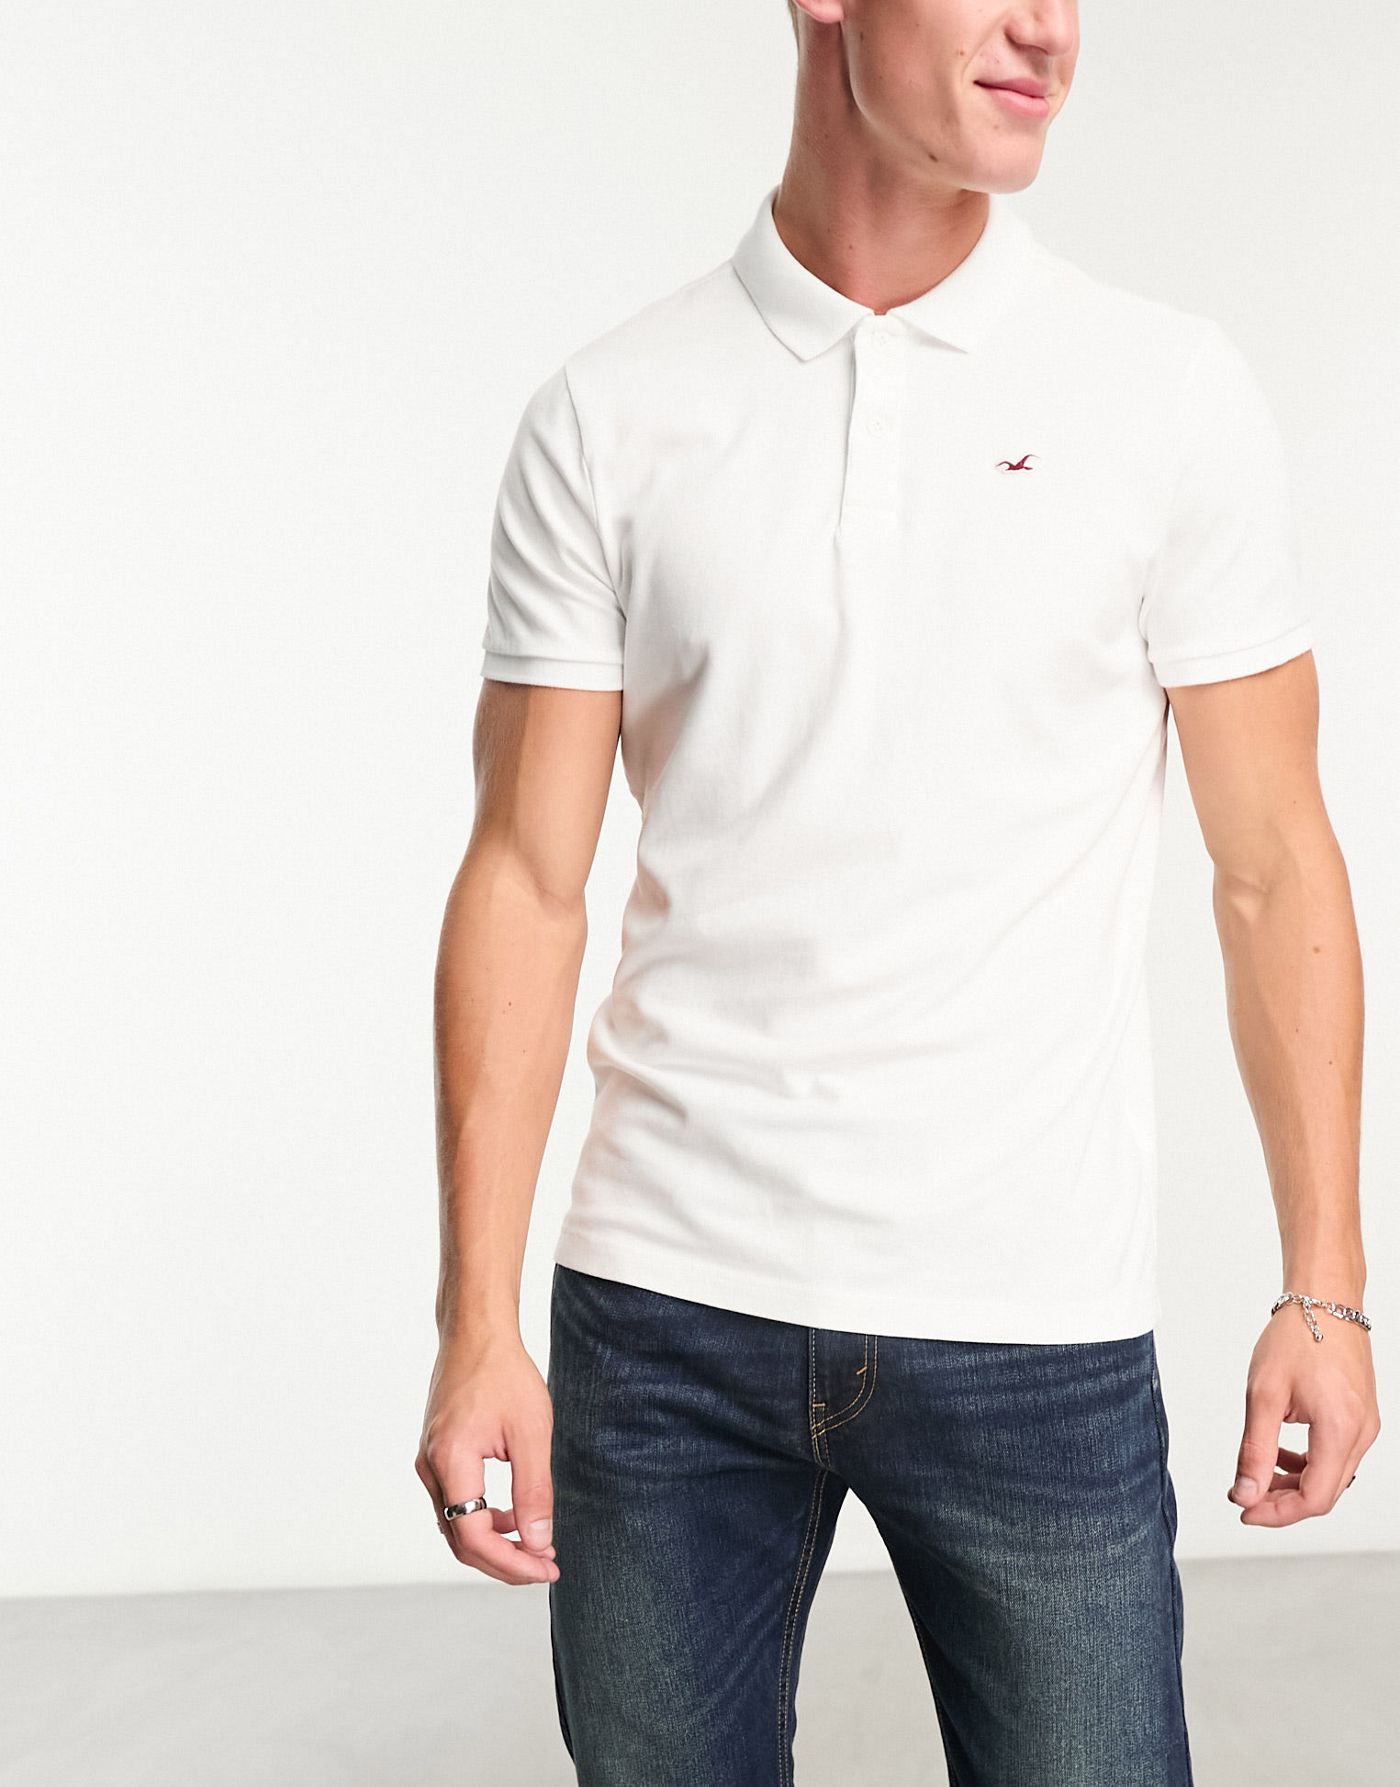 Hollister 3 pack icon logo slim fit pique polo in white/navy/black